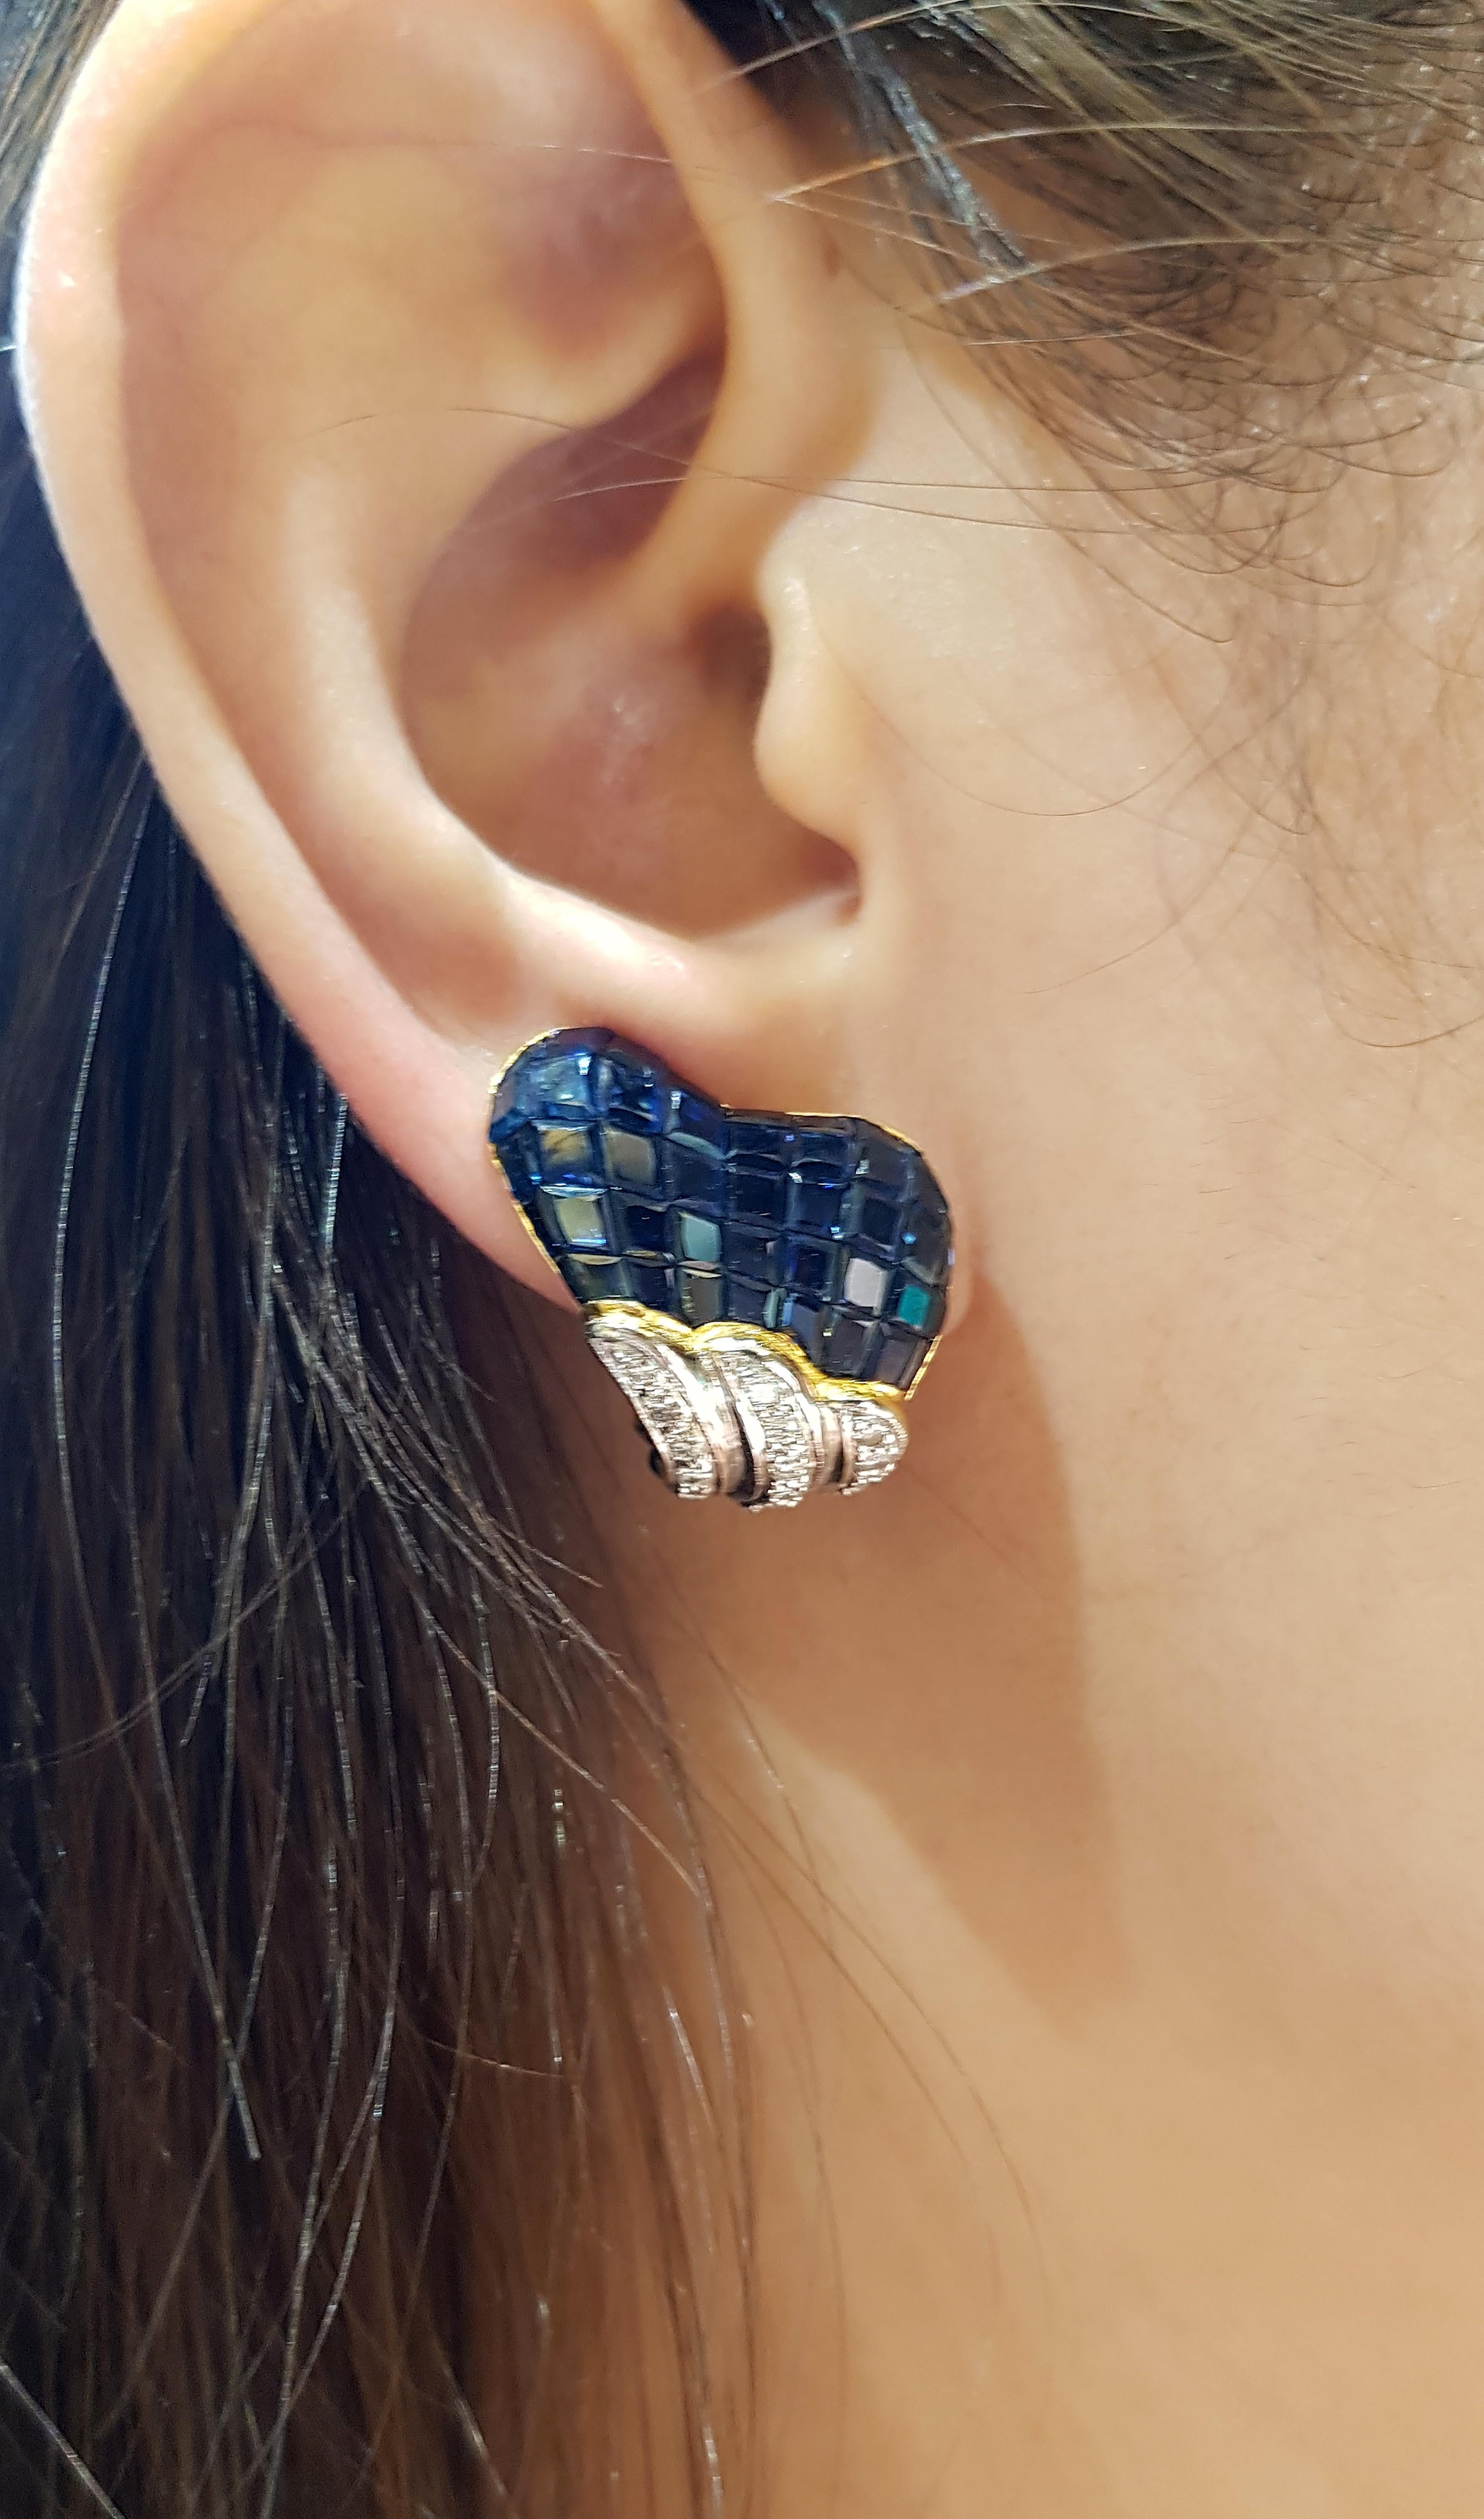 Blue Sapphire 17.59 carats with Diamond 0.71 carat Earrings set in 18 Karat Gold Settings

Width:  2.0 cm 
Length: 2.1 cm
Total Weight: 19.36 grams

